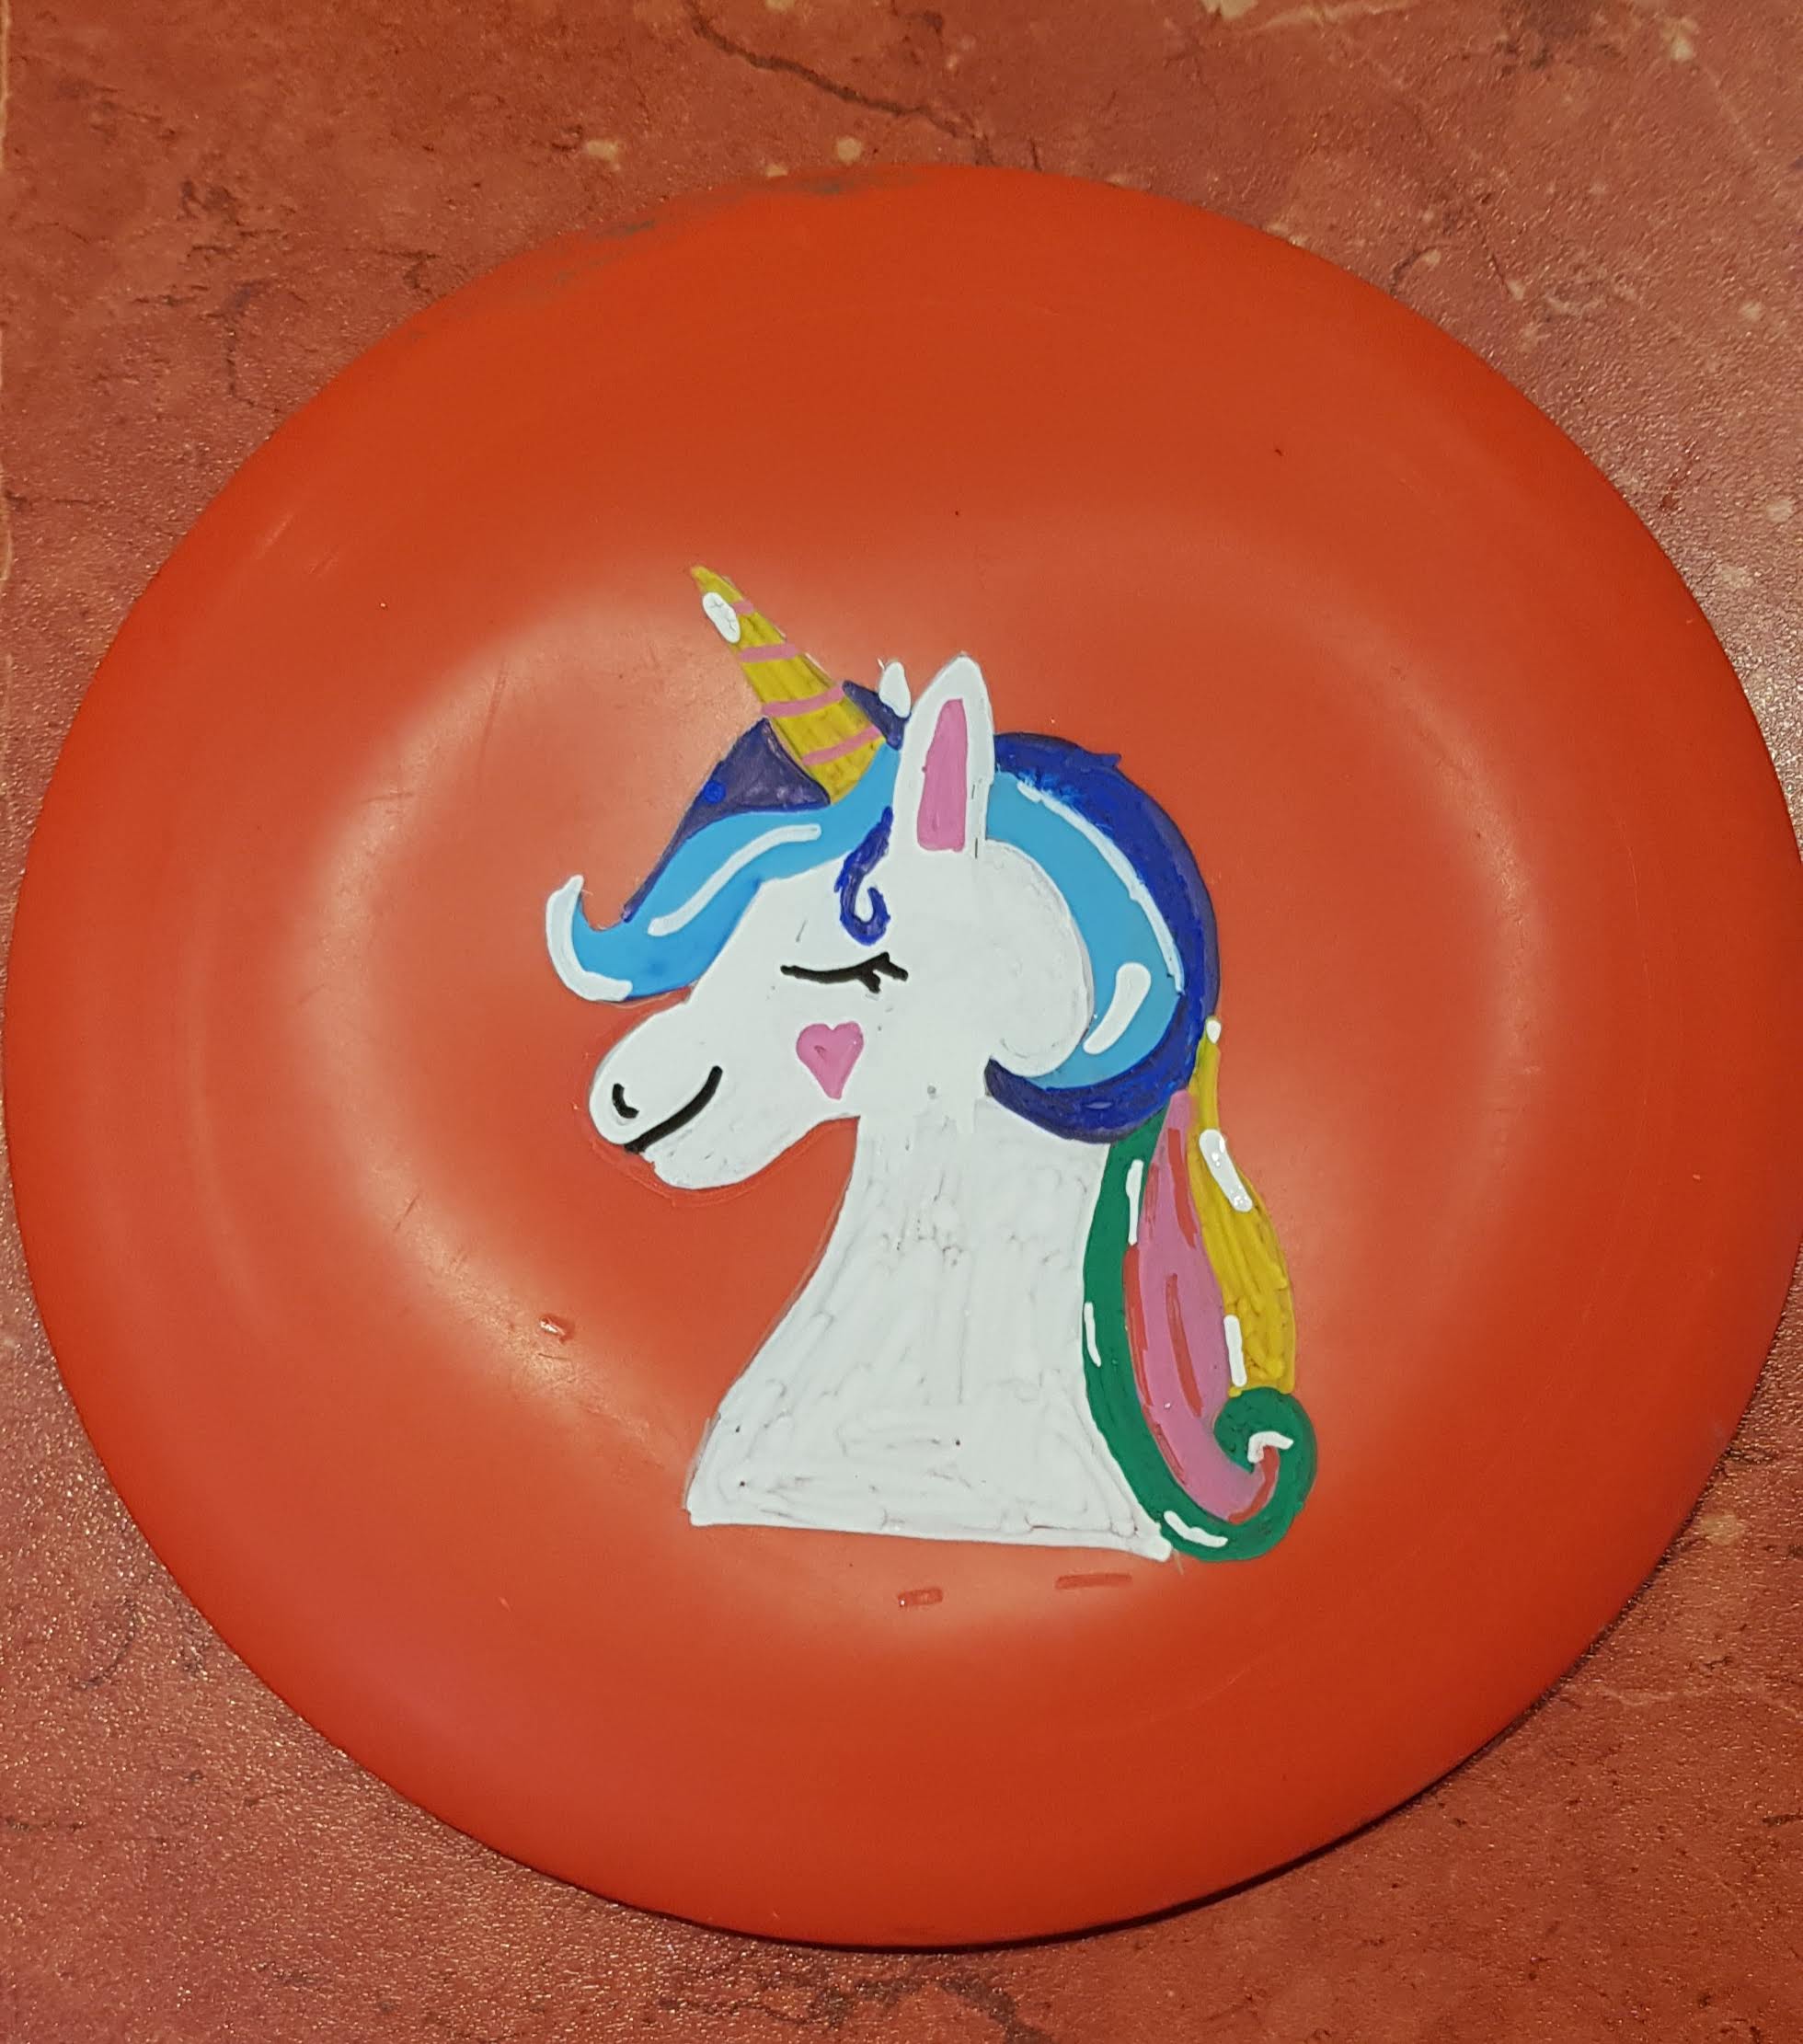 A Drawing of a Unicorn done in Posca Marker on a frisbee